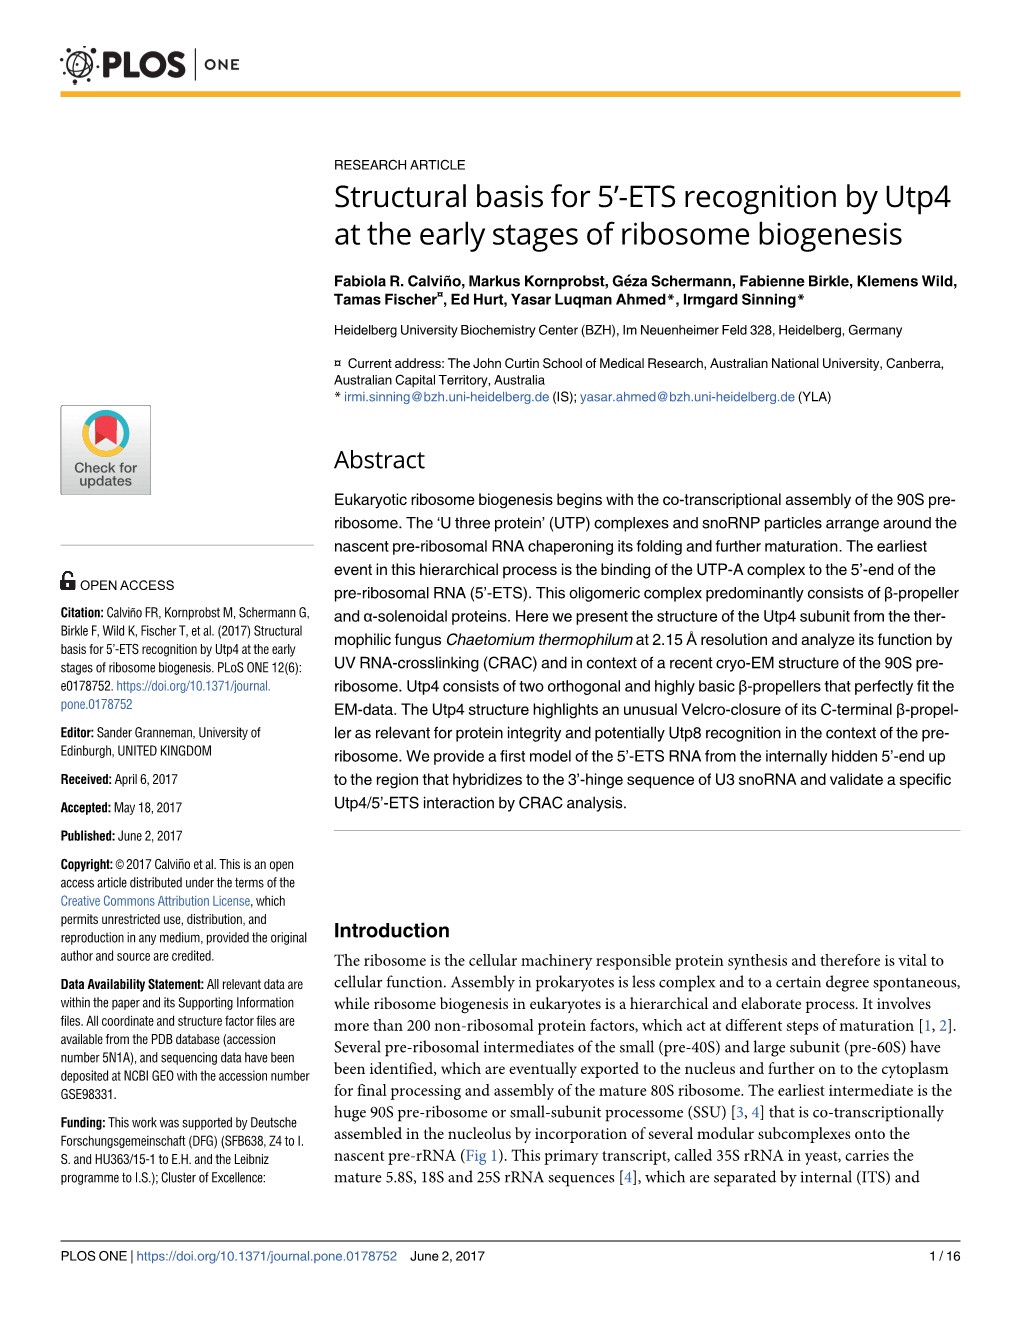 ETS Recognition by Utp4 at the Early Stages of Ribosome Biogenesis